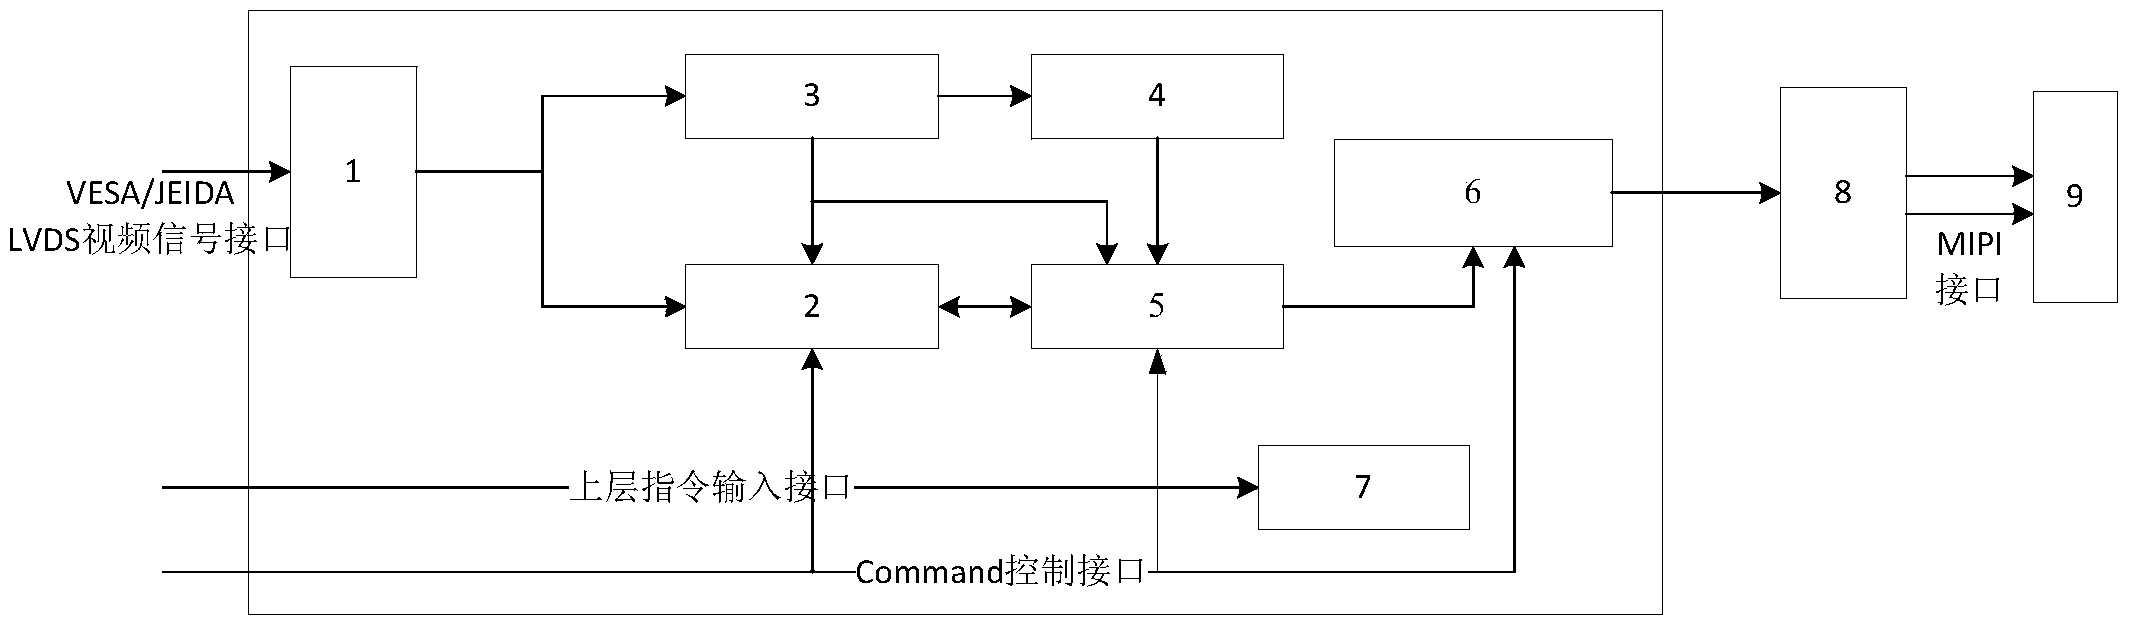 Method and device for achieving COMMAND mode MIPI signals through bridge chip